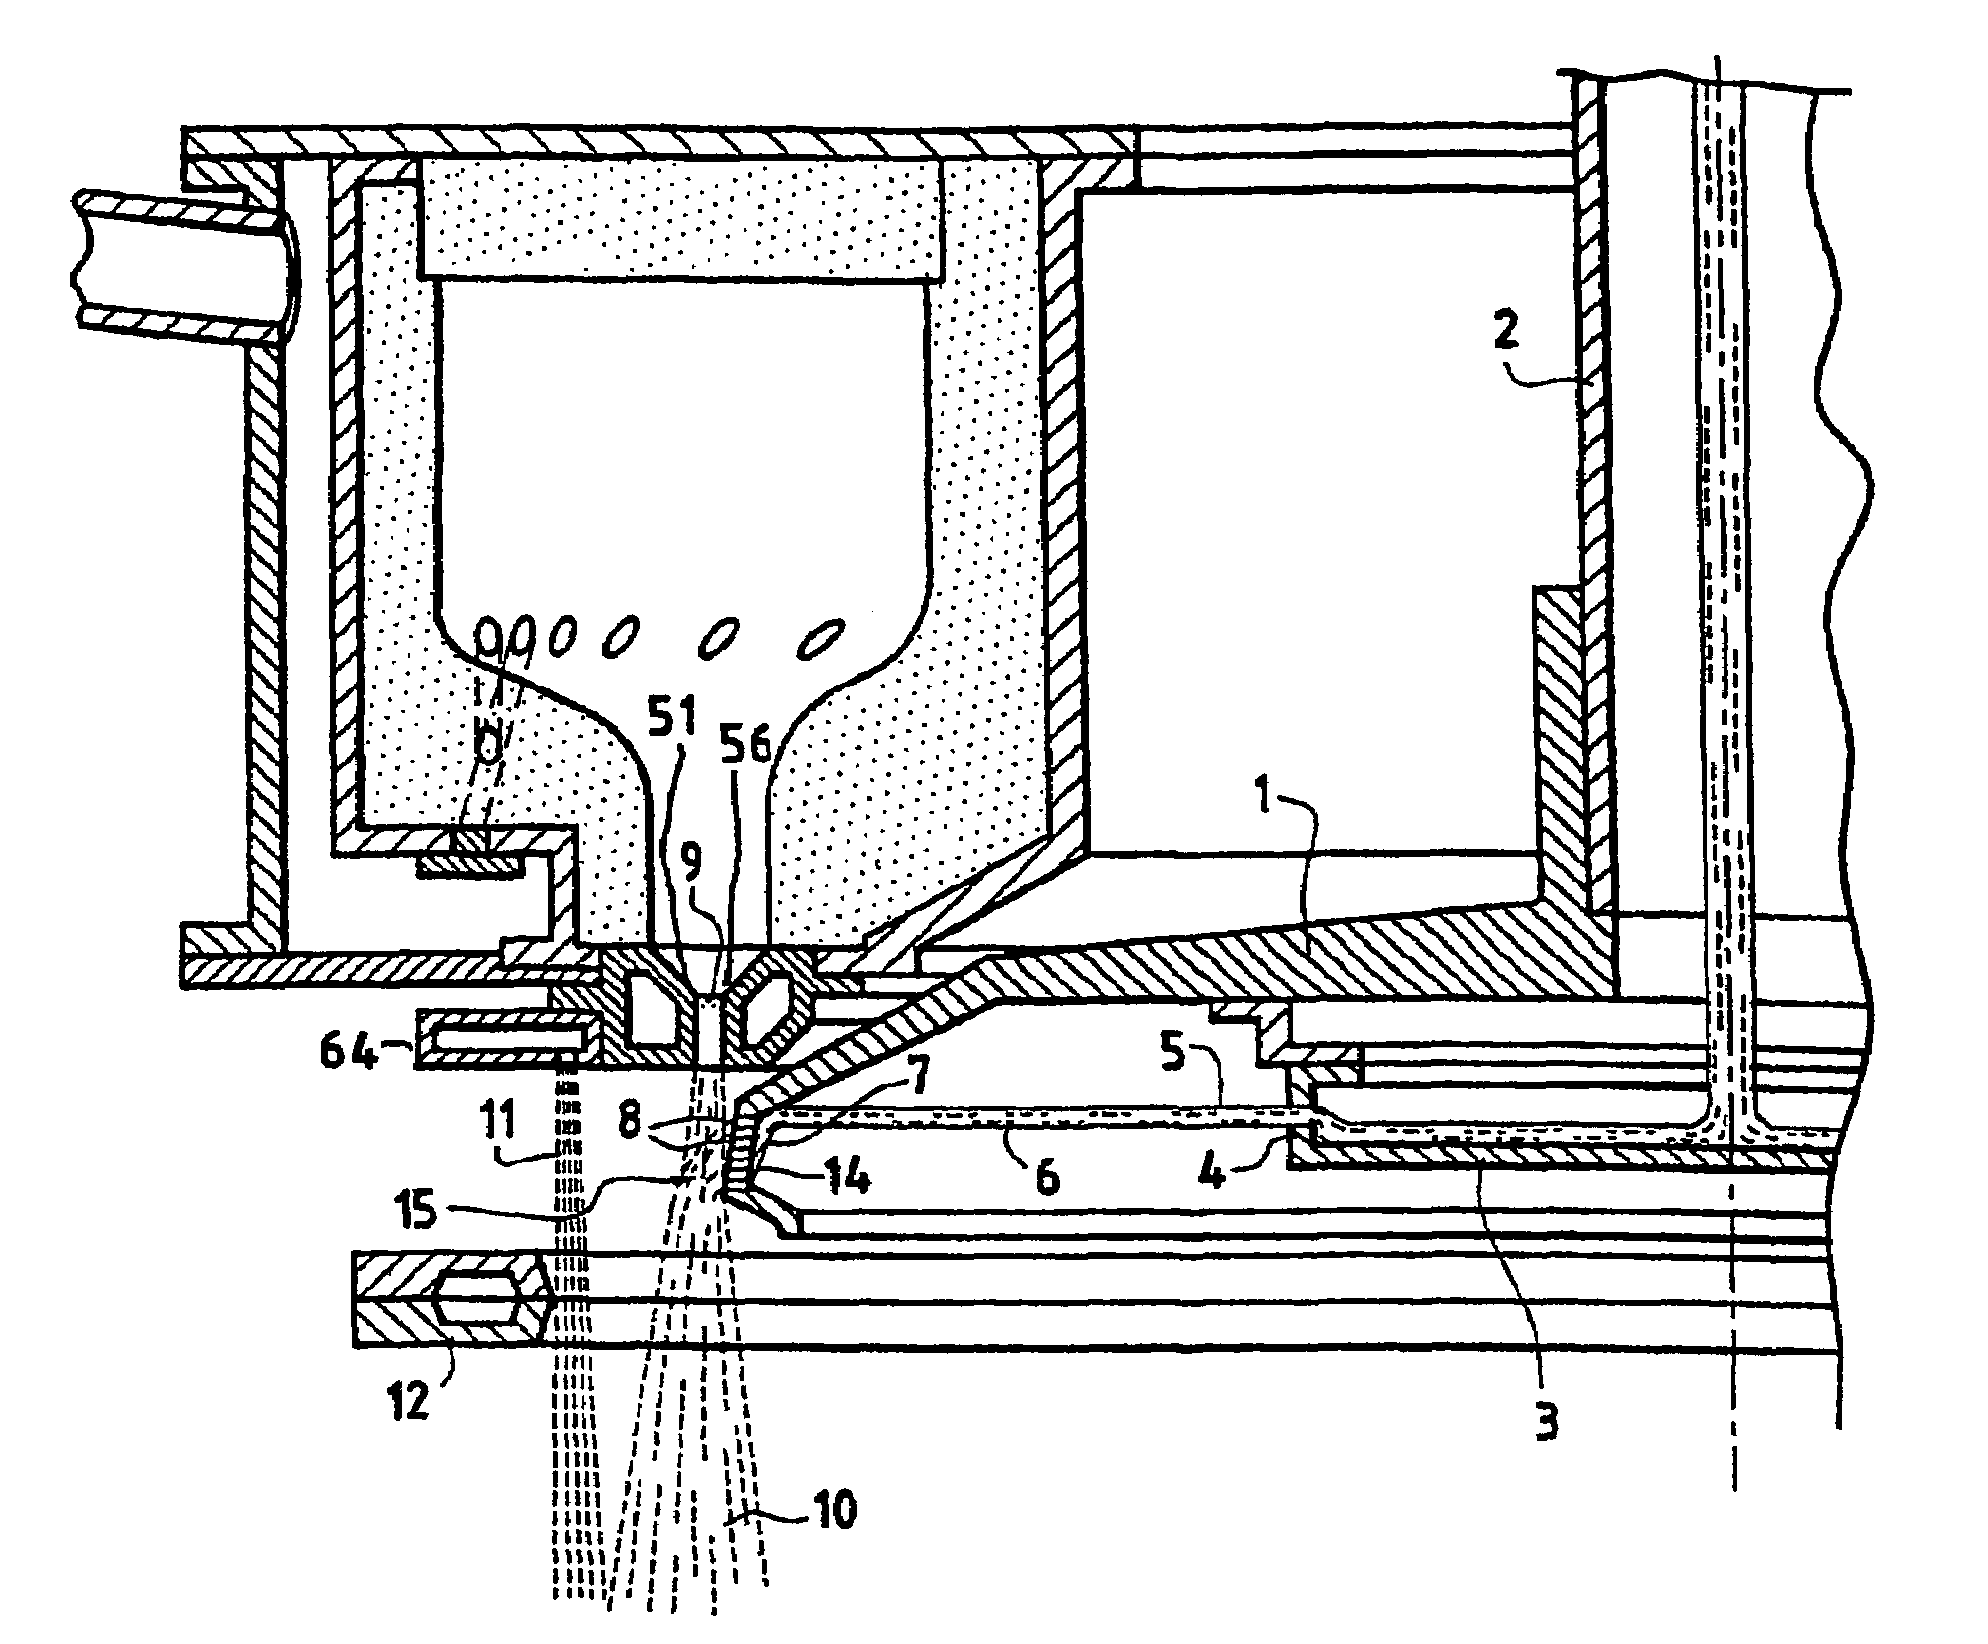 Process and device for formation of mineral wool and mineral wool products